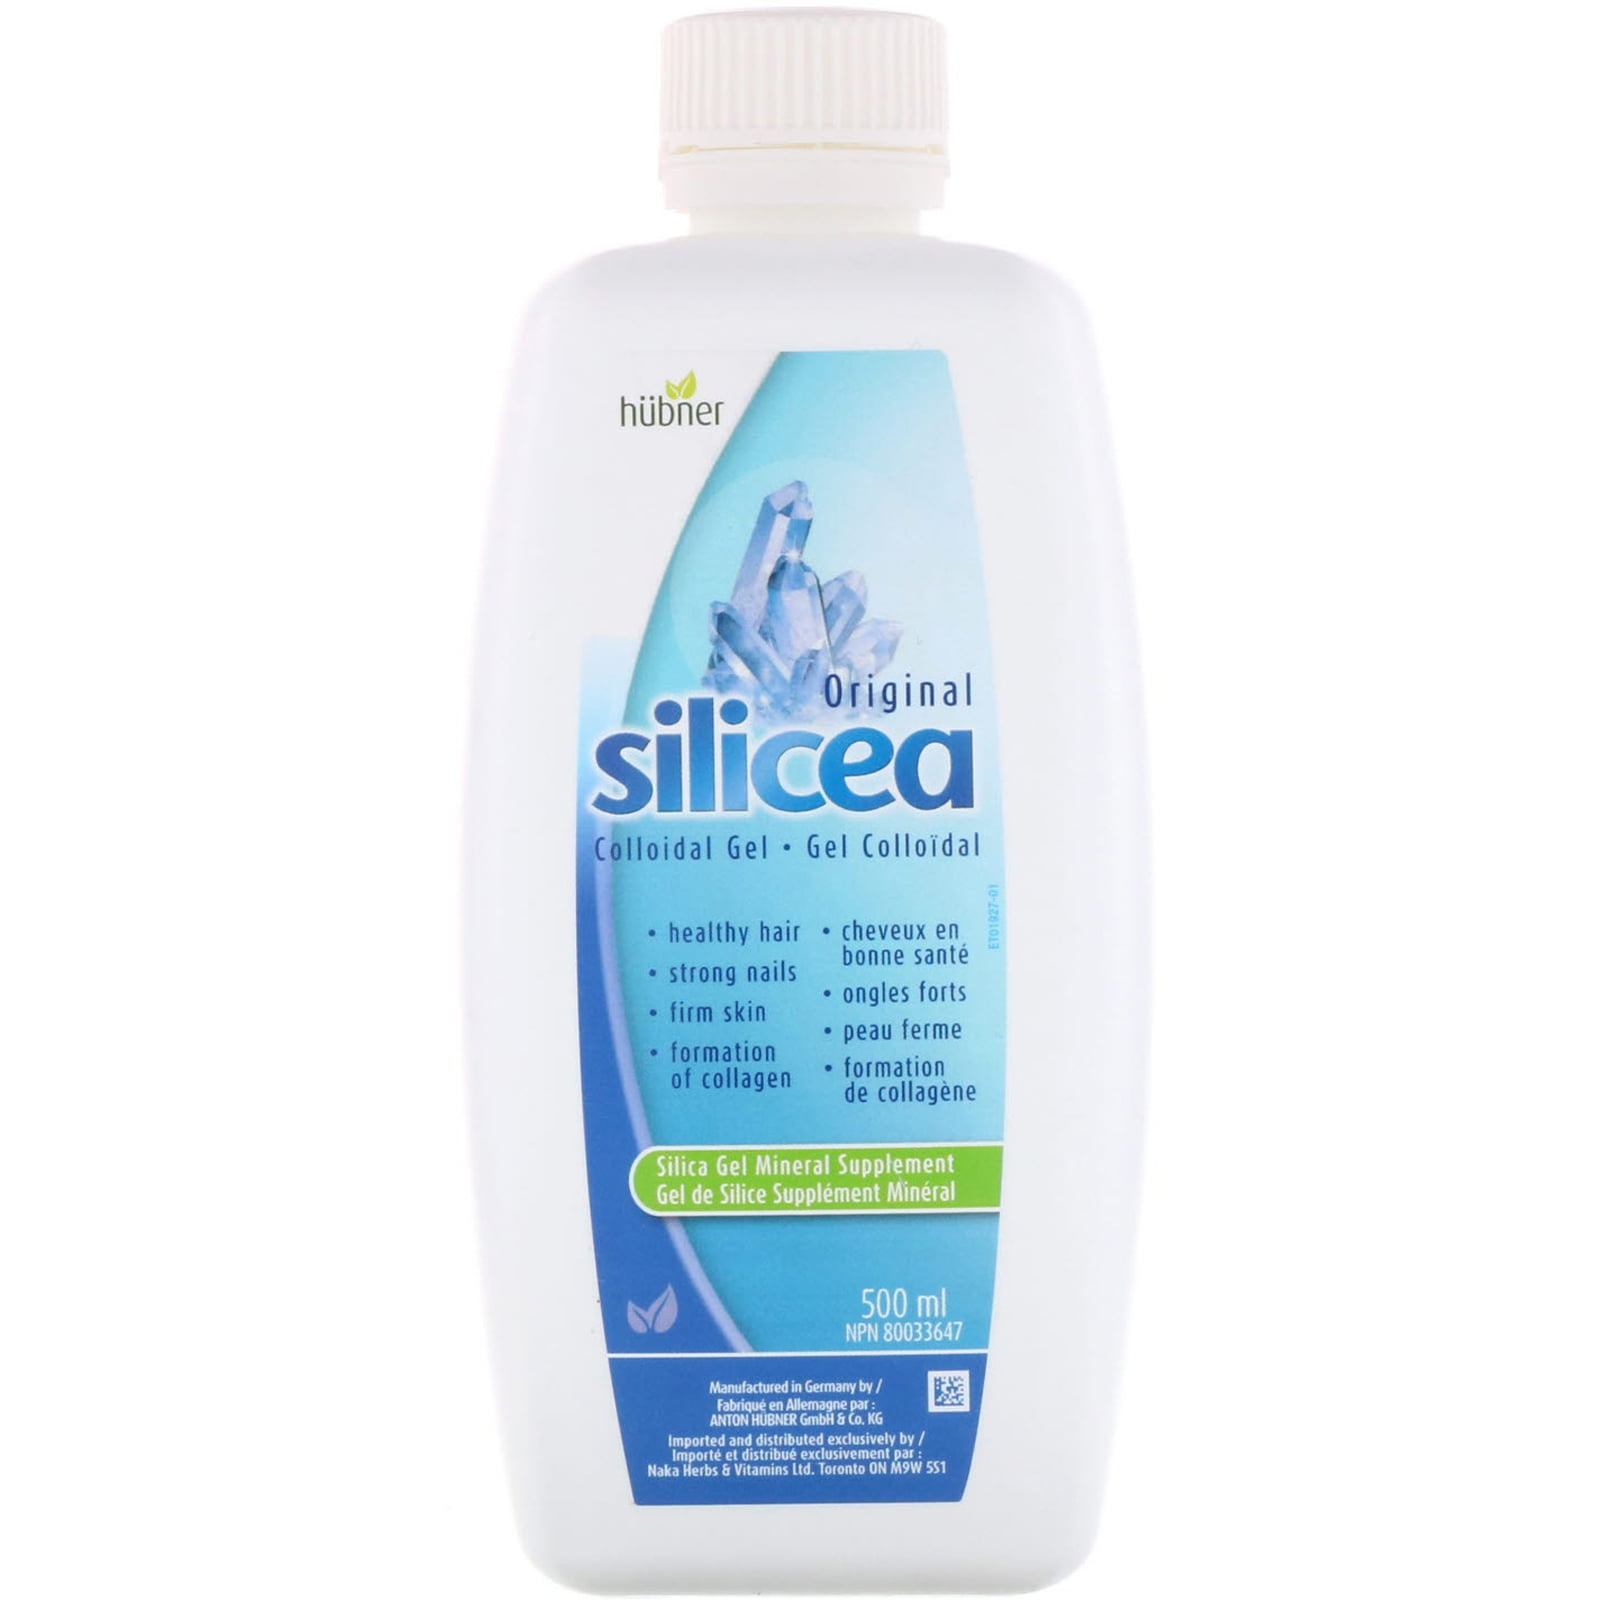 Hübner Original Silicea Gel One a Day Capsules for Hair, Skin, Nails, and  Connective Tissue, Pure Colloidal Silica Gel Formula, No Additives or